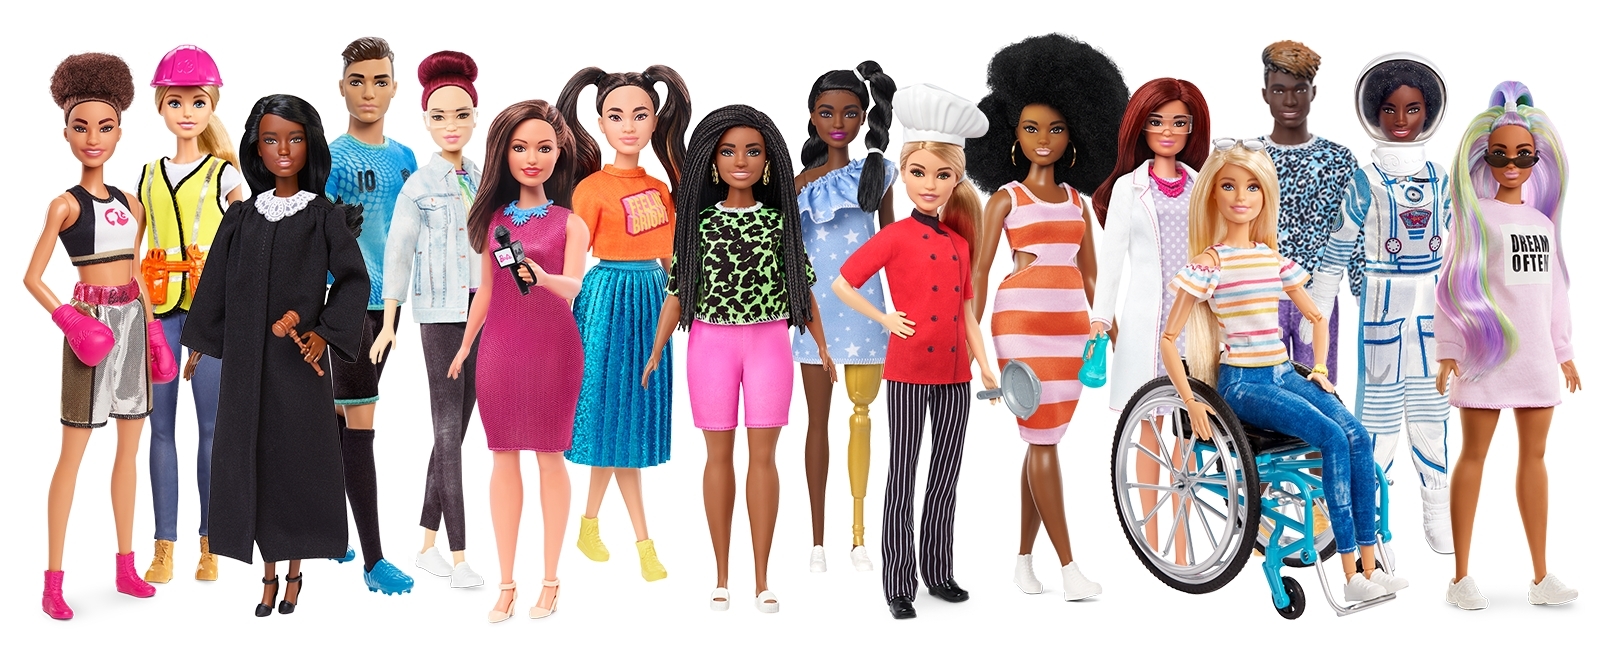 Barbie Named 2020 Top Global Toy Property of the Year, Per NPD Business Wire